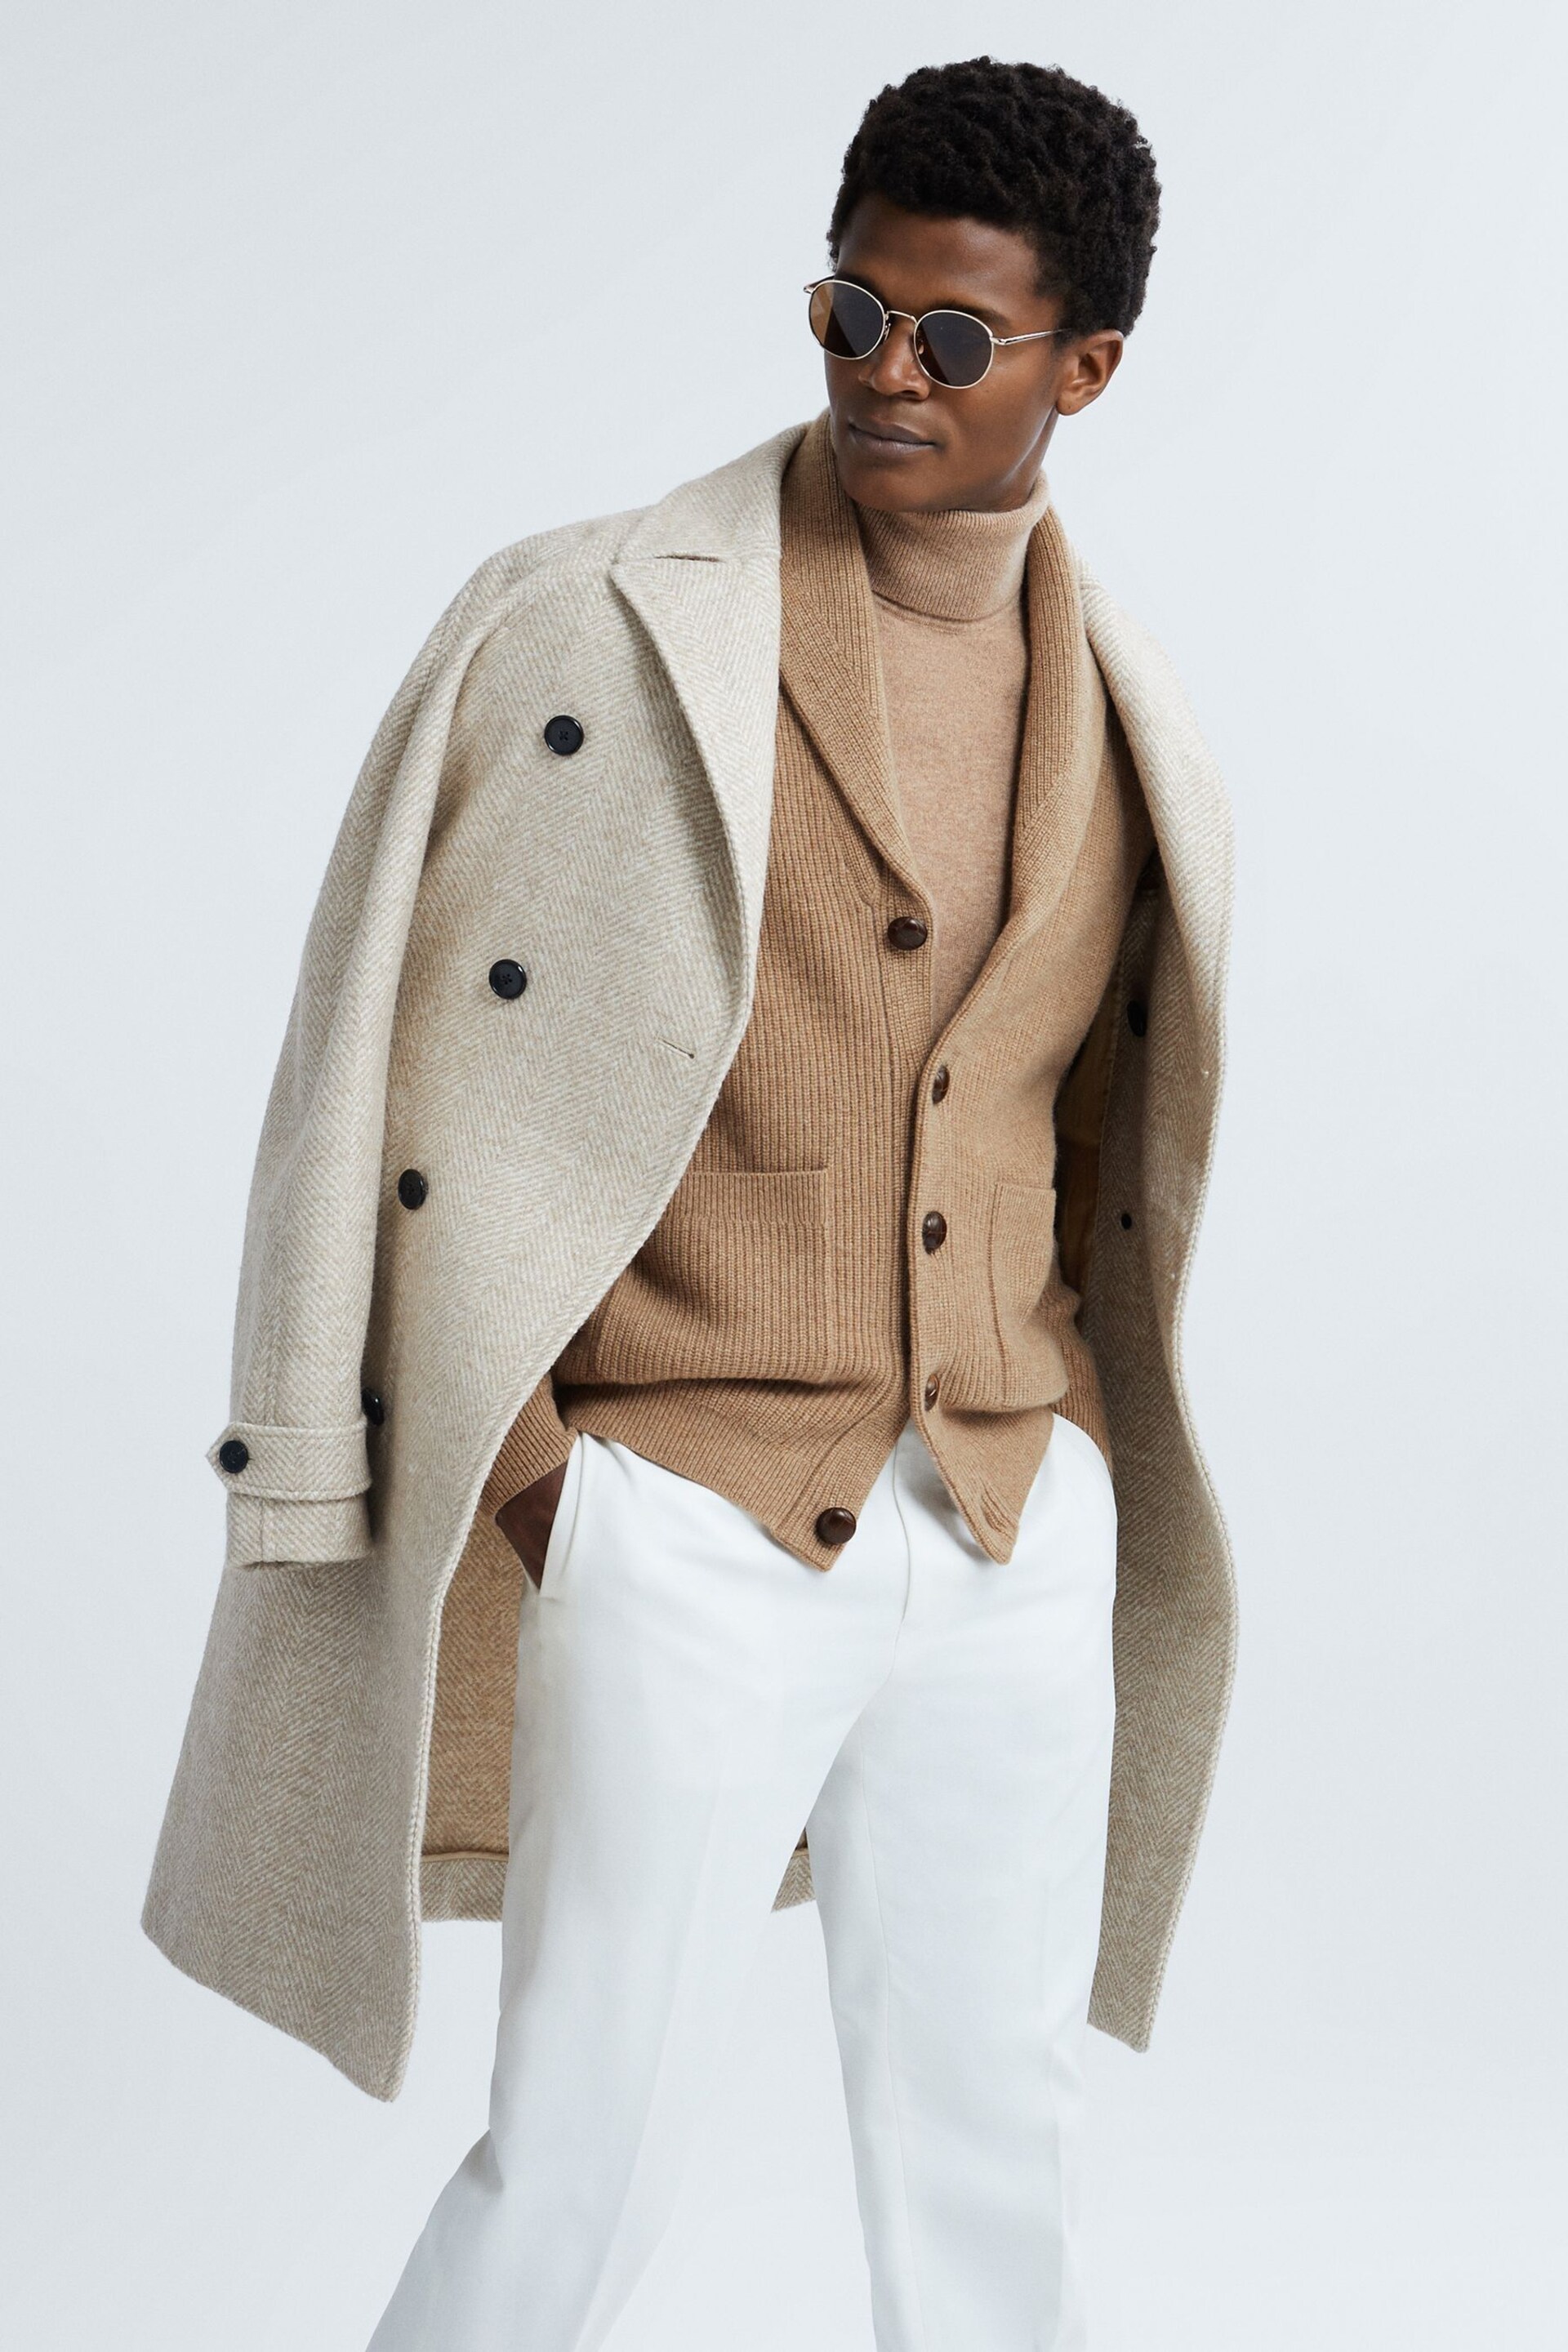 Reiss Camel King Cashmere Button-Through Cardigan - Image 1 of 7